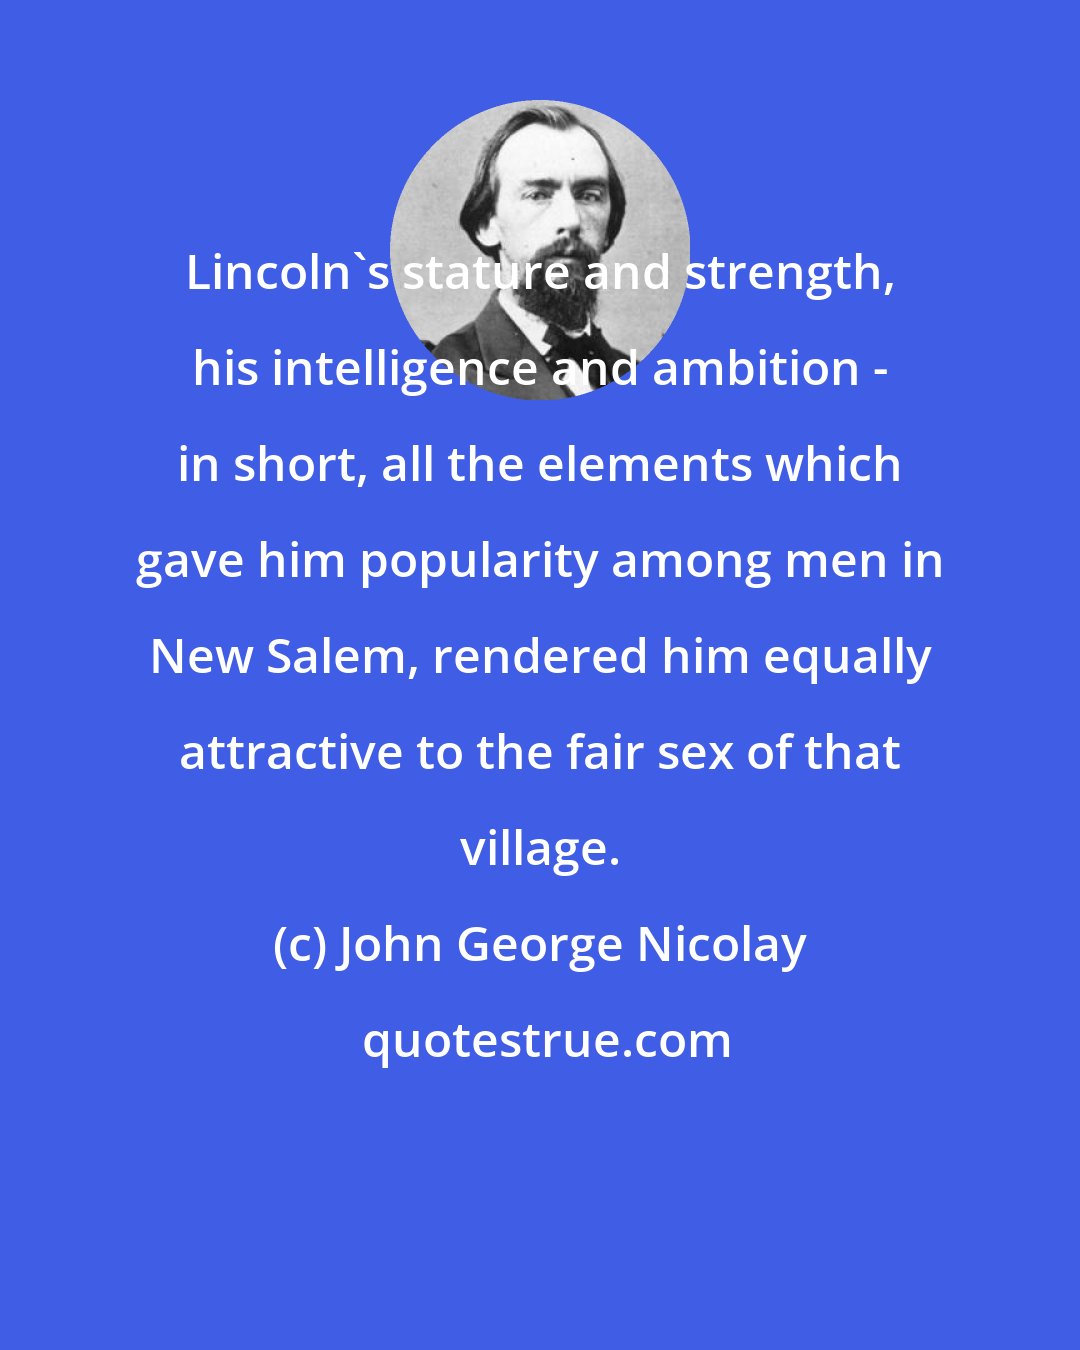 John George Nicolay: Lincoln's stature and strength, his intelligence and ambition - in short, all the elements which gave him popularity among men in New Salem, rendered him equally attractive to the fair sex of that village.